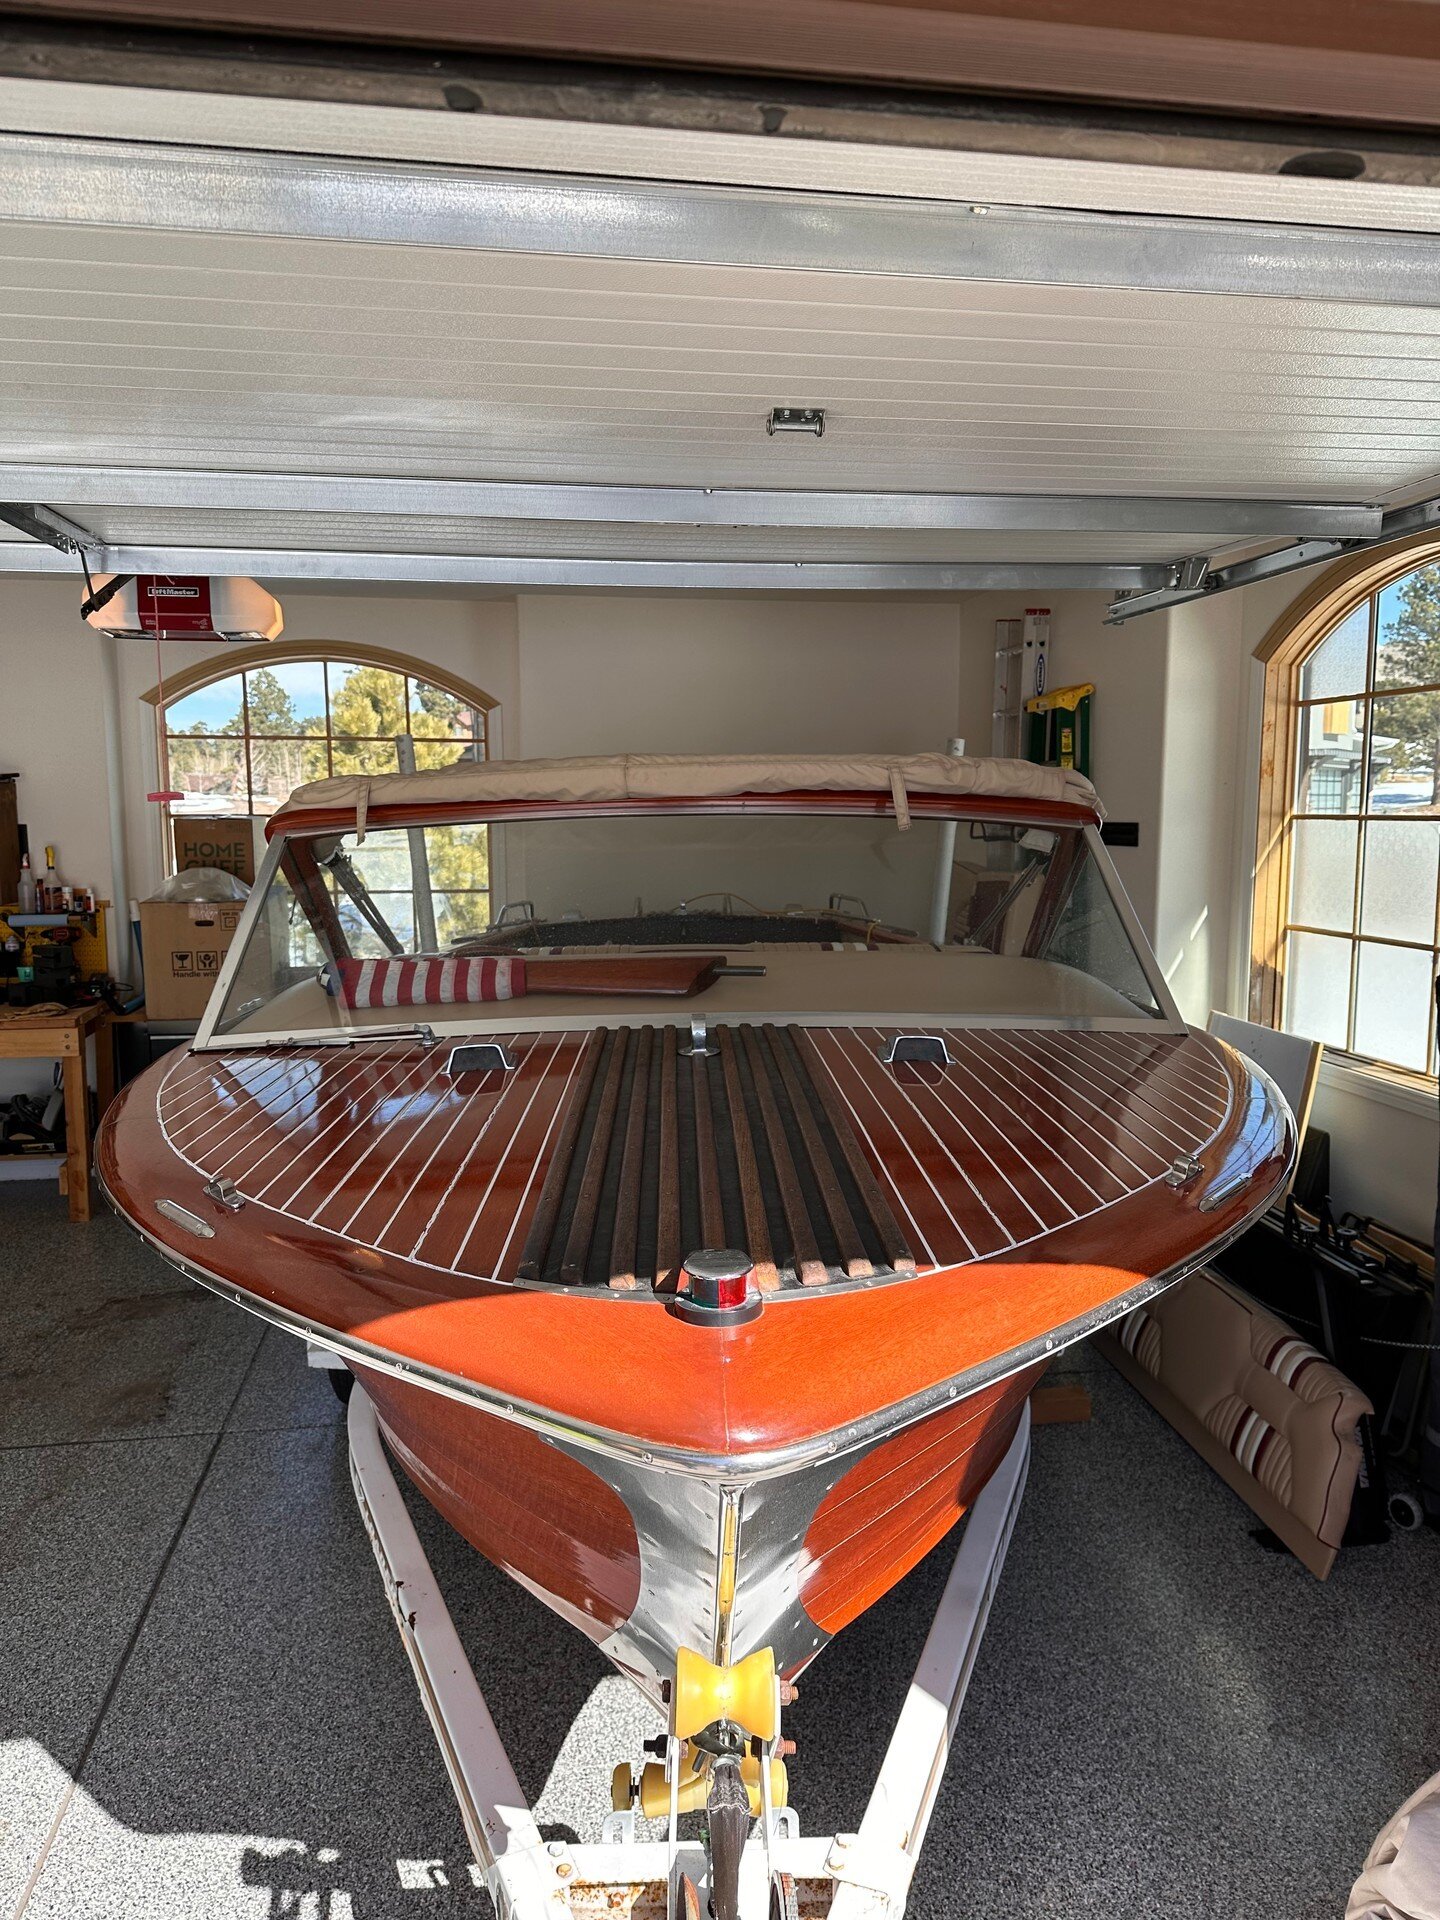 Just a peek at a beauty we have coming in for some custom work this summer. The 2023 schedule is filling up quickly, so if you're on the fence about having any work done, contact me soon!

#streblow #customboat #workshop, #boating, #woodboat, #woodsh